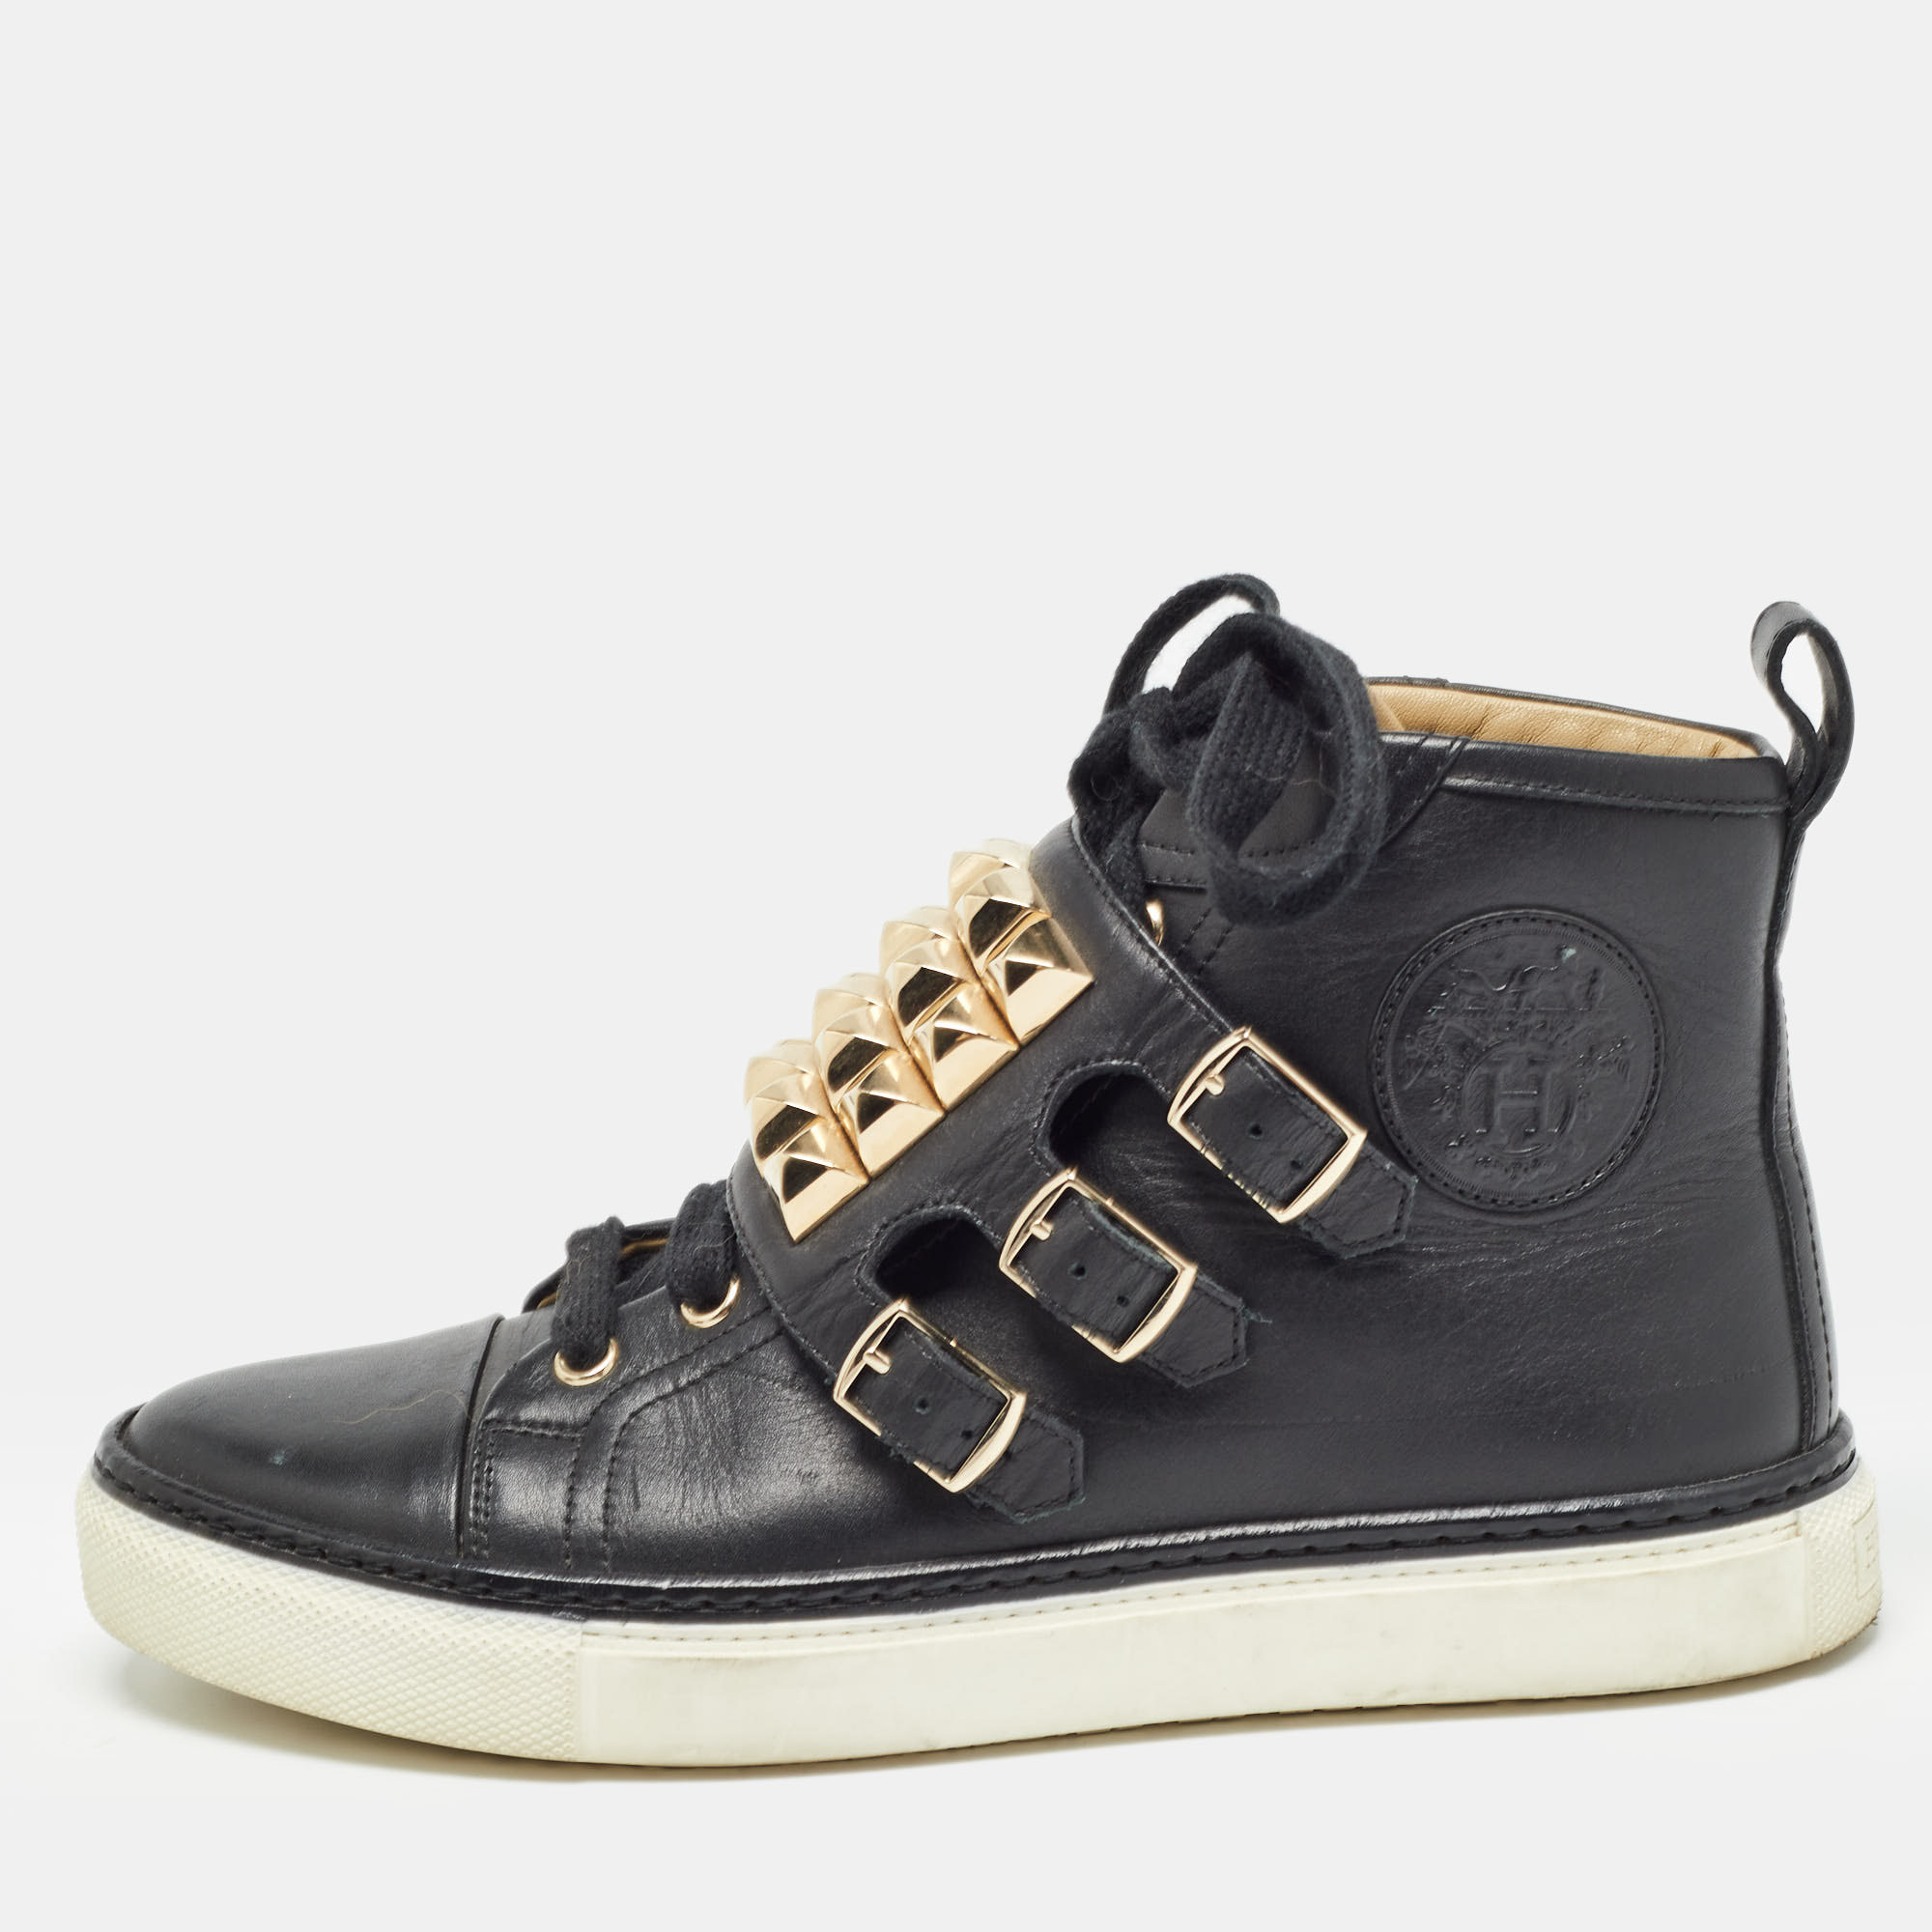 Tory burch hermes black leather lennox high top sneakers size 36